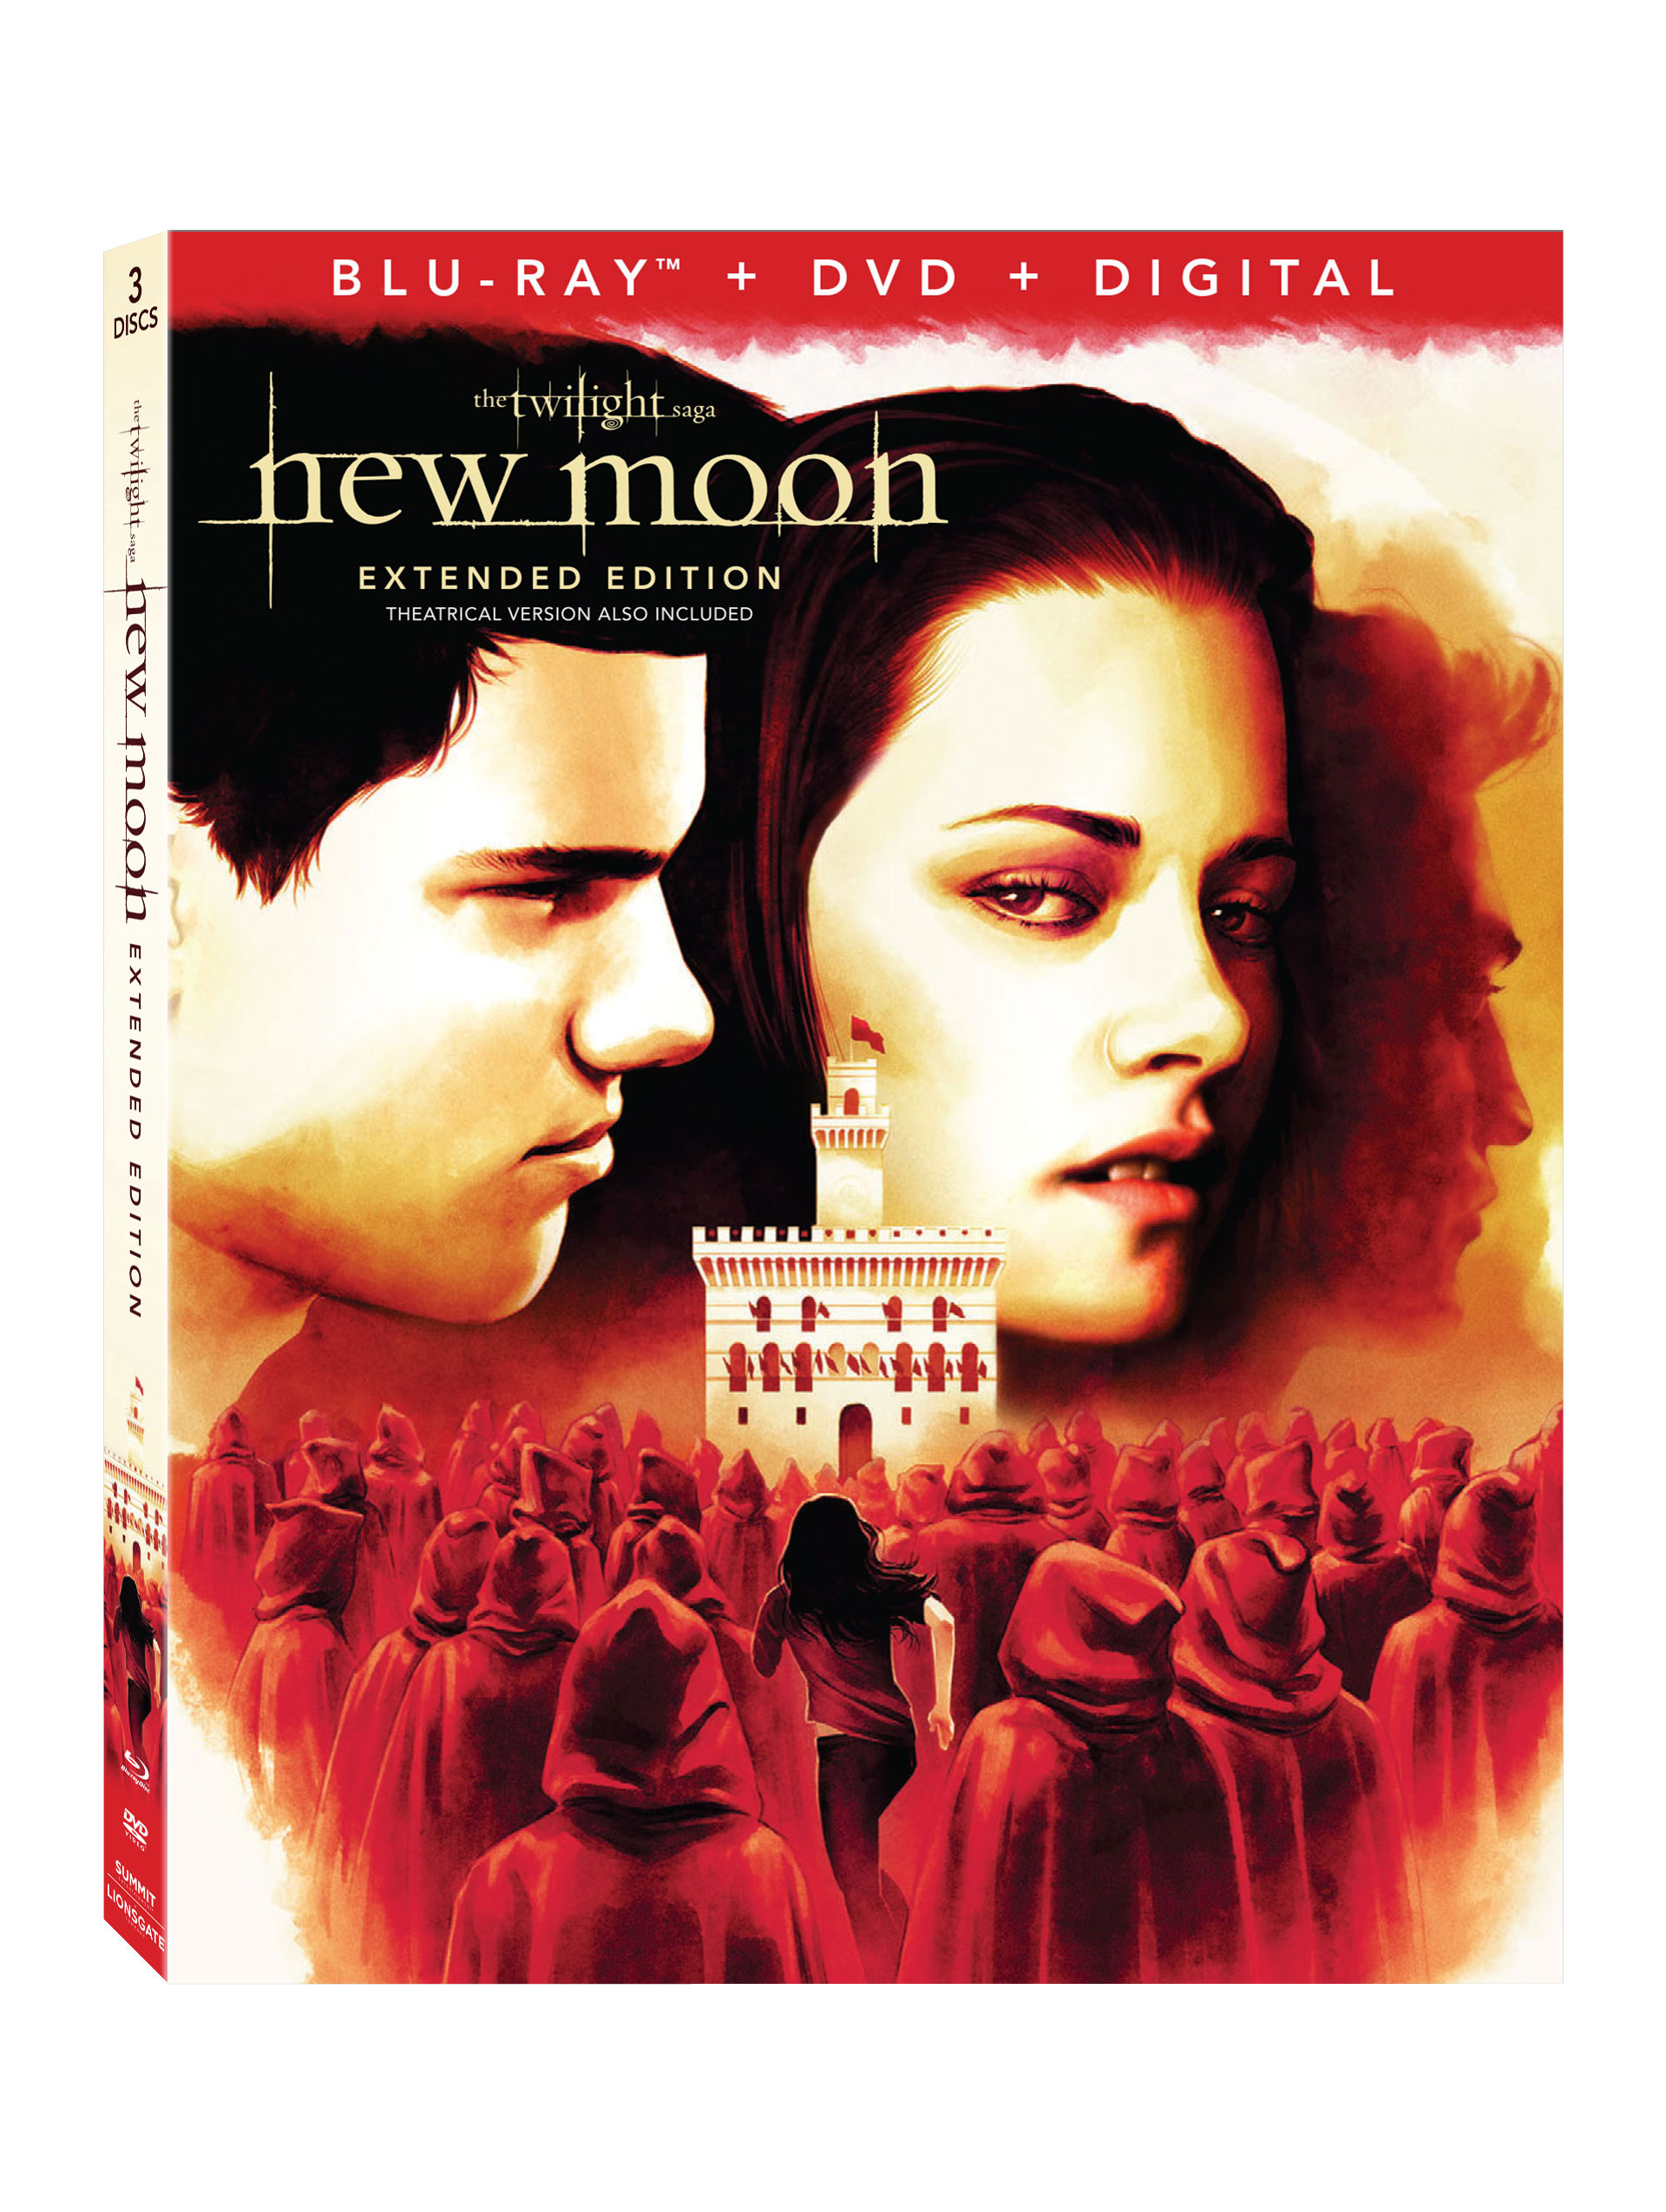 The Twilight Saga New Moon Blu-Ray Combo Pack Cover (Lionsgate Home Entertainment)